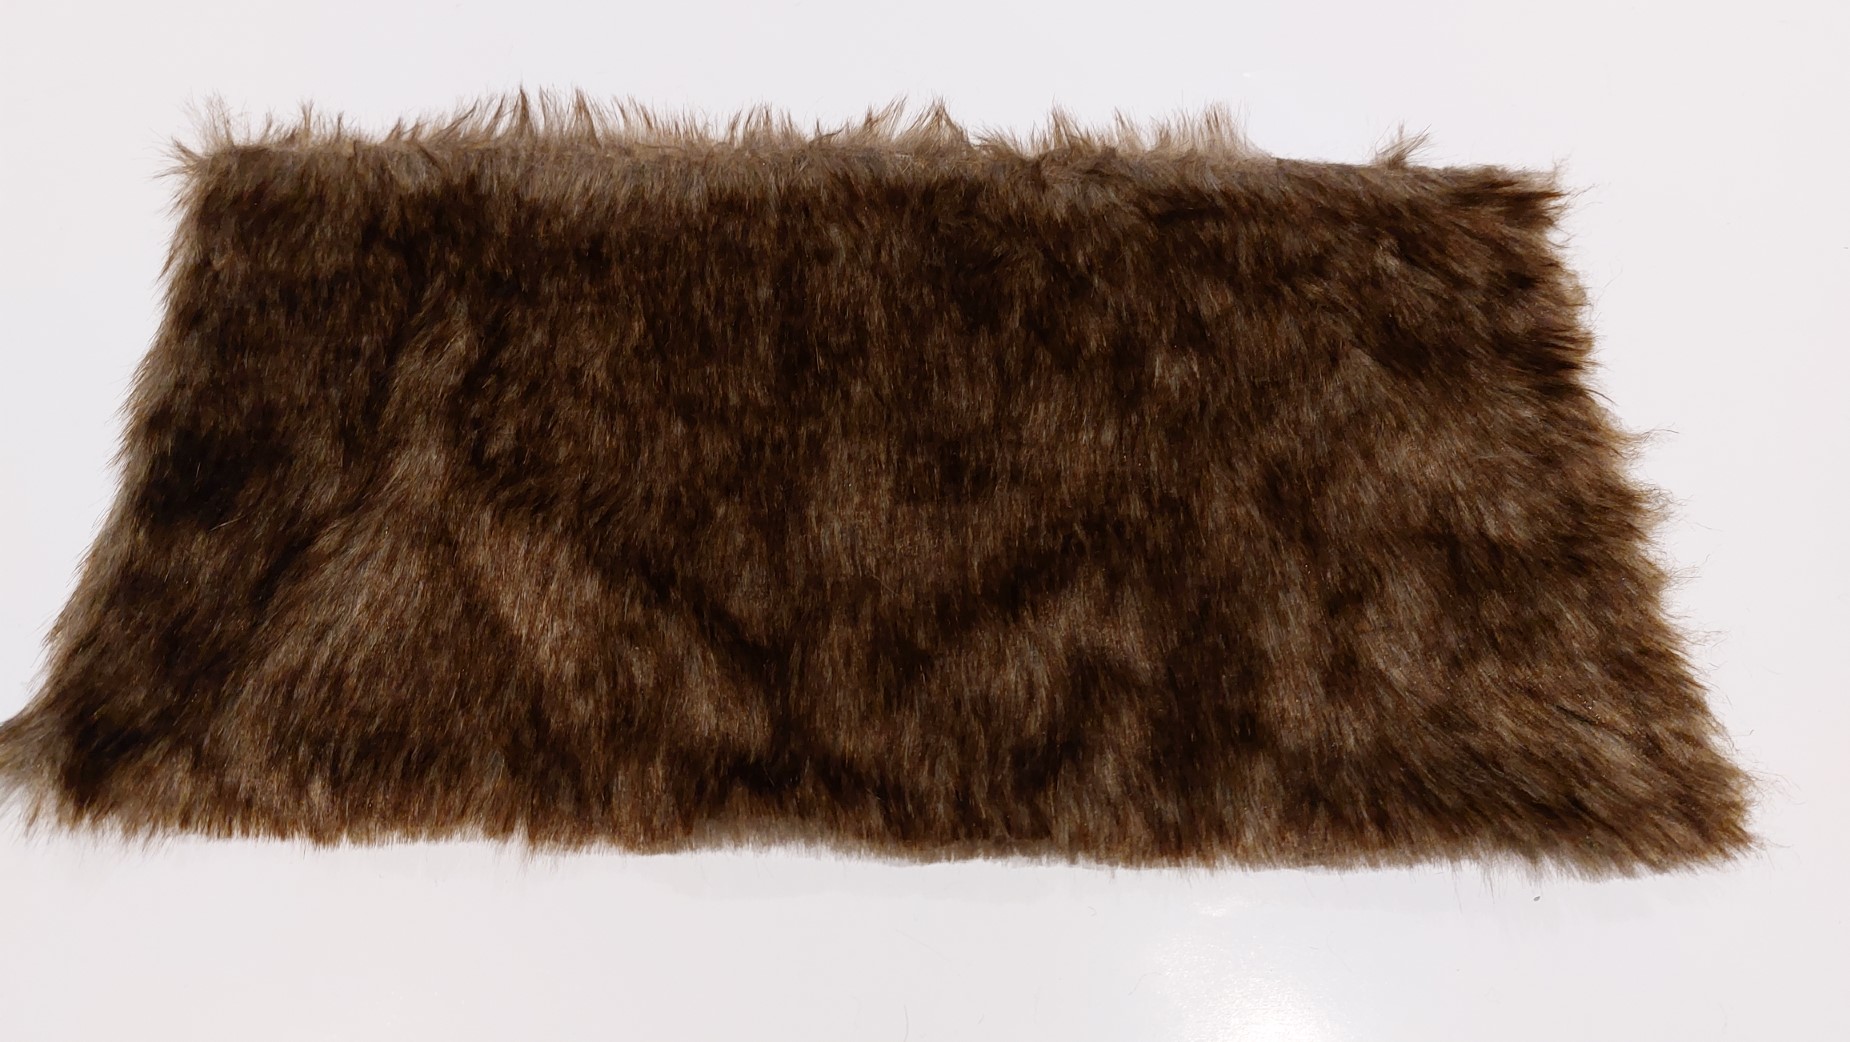 Base fur of the boot covers